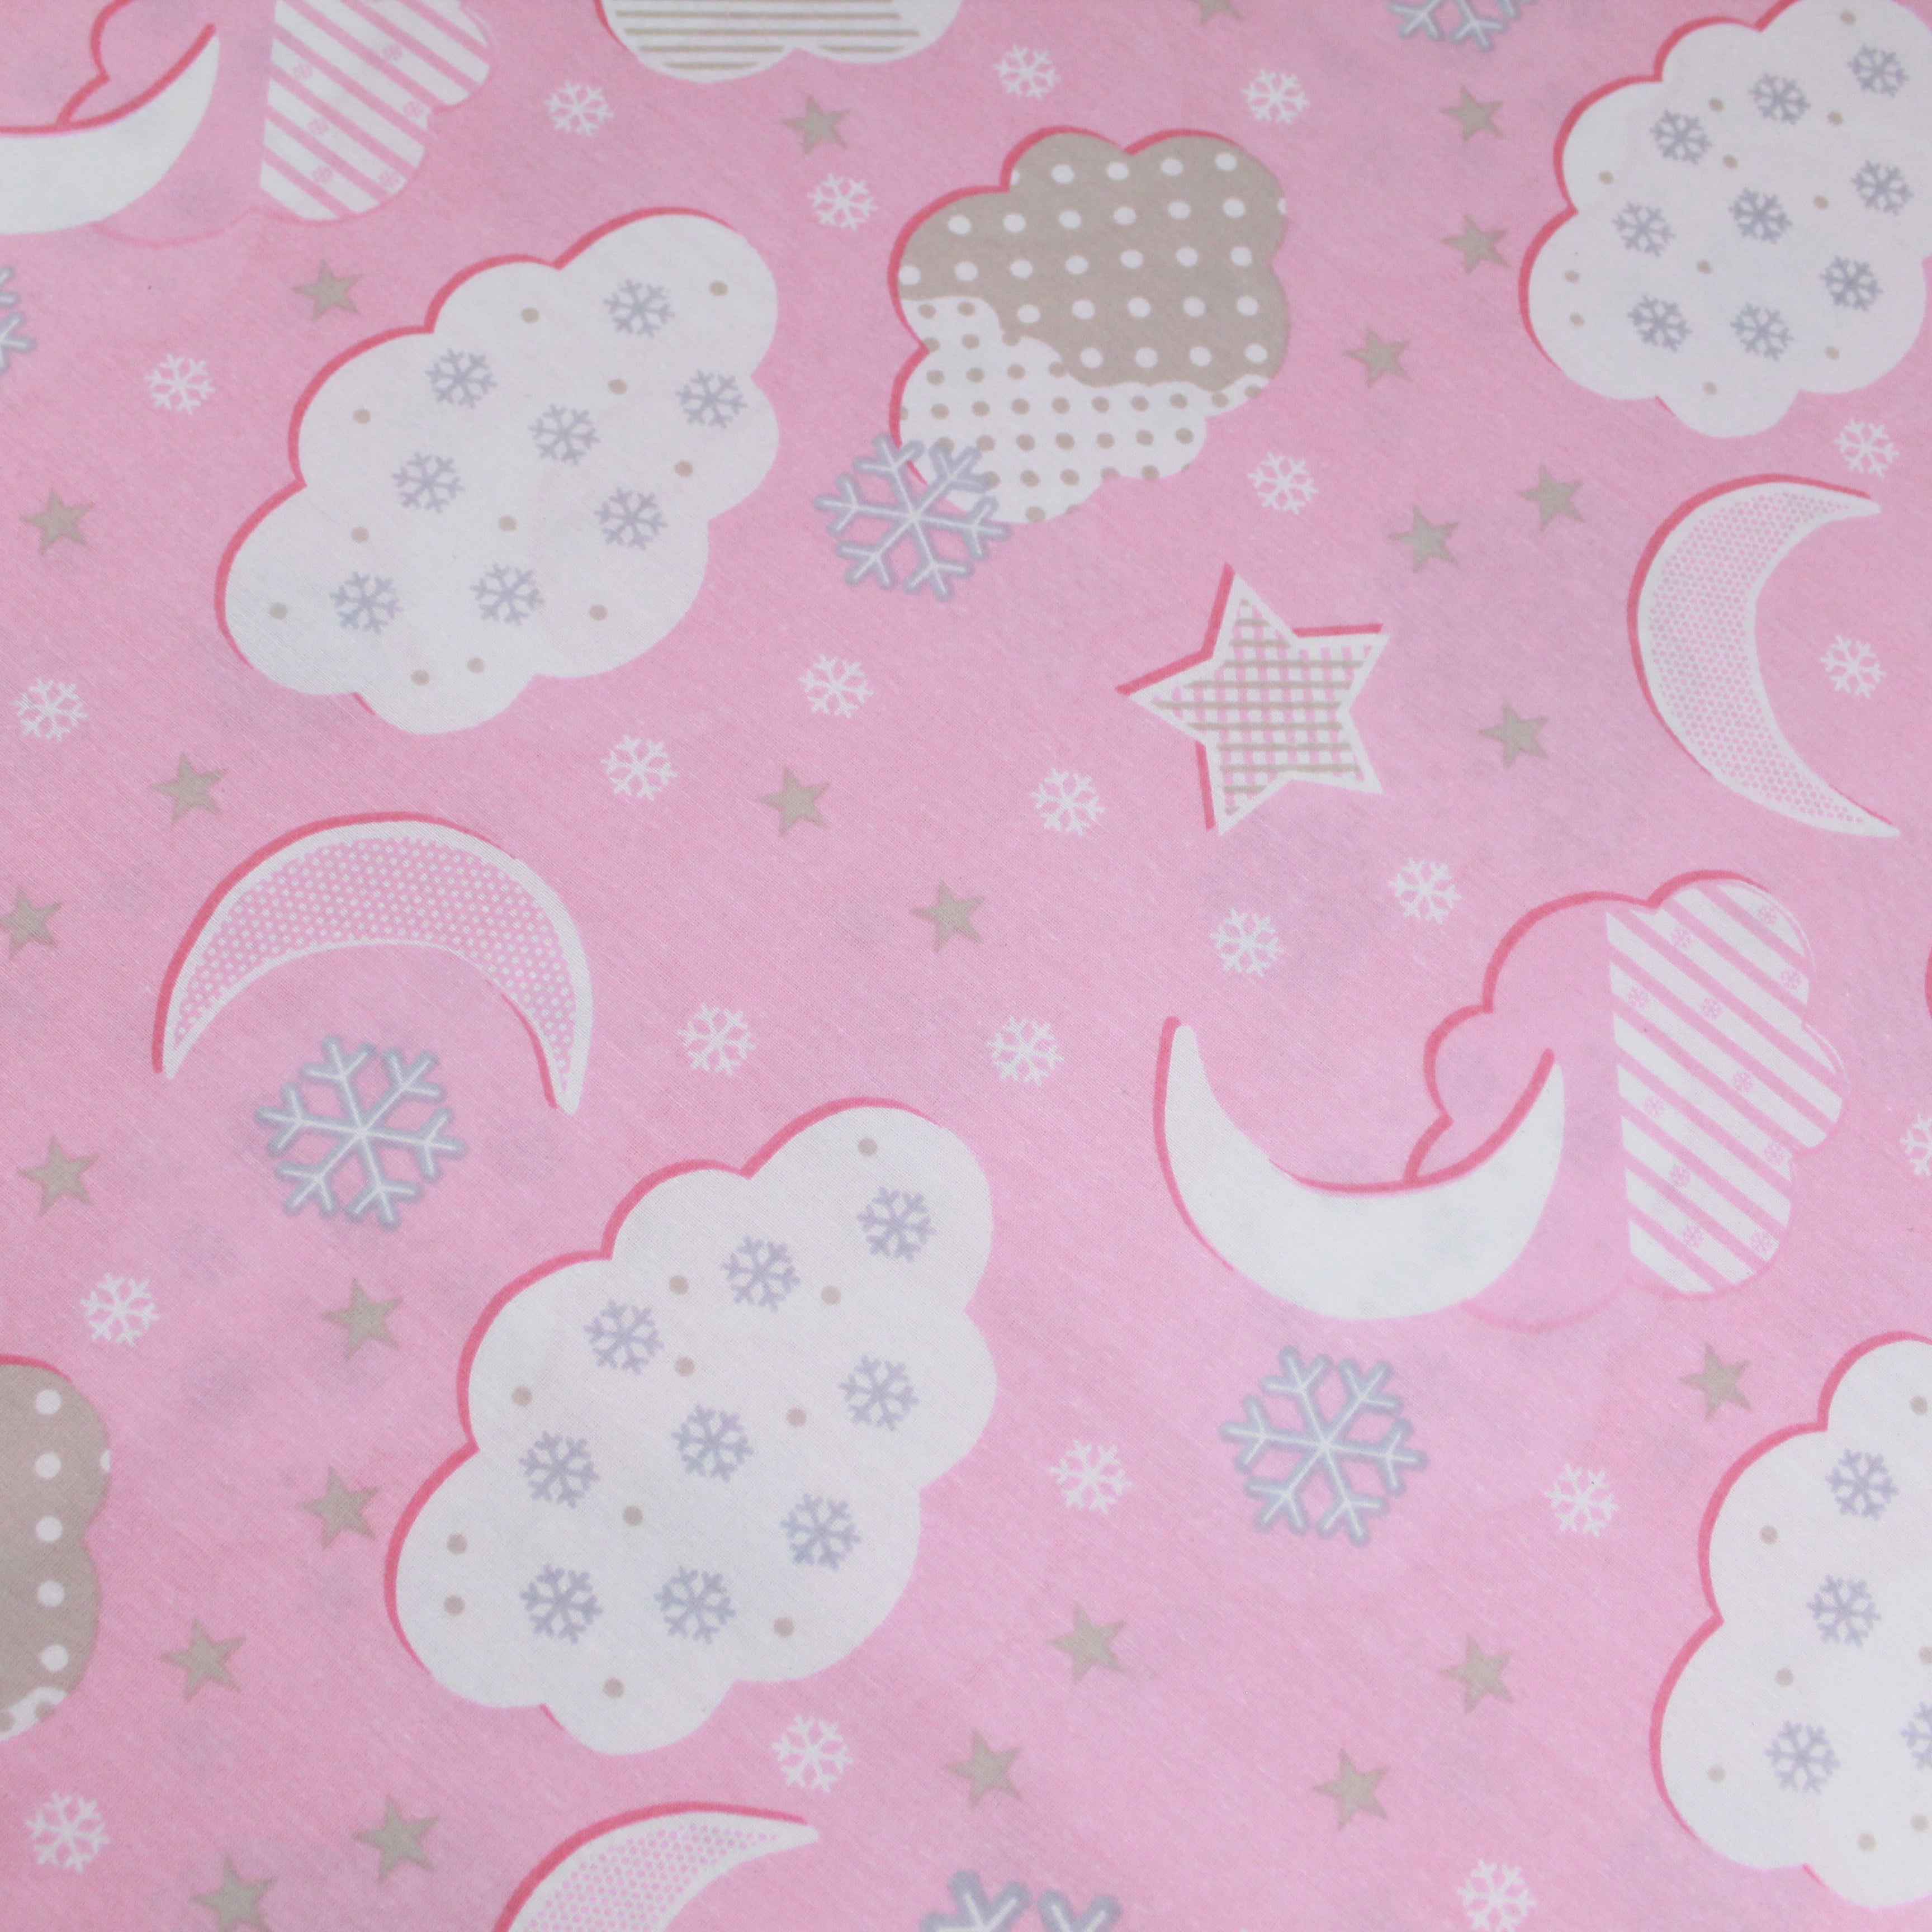 Premium Quality Super Wide Cotton Blend Sheeting "Moon & Clouds" 94" Wide Pink